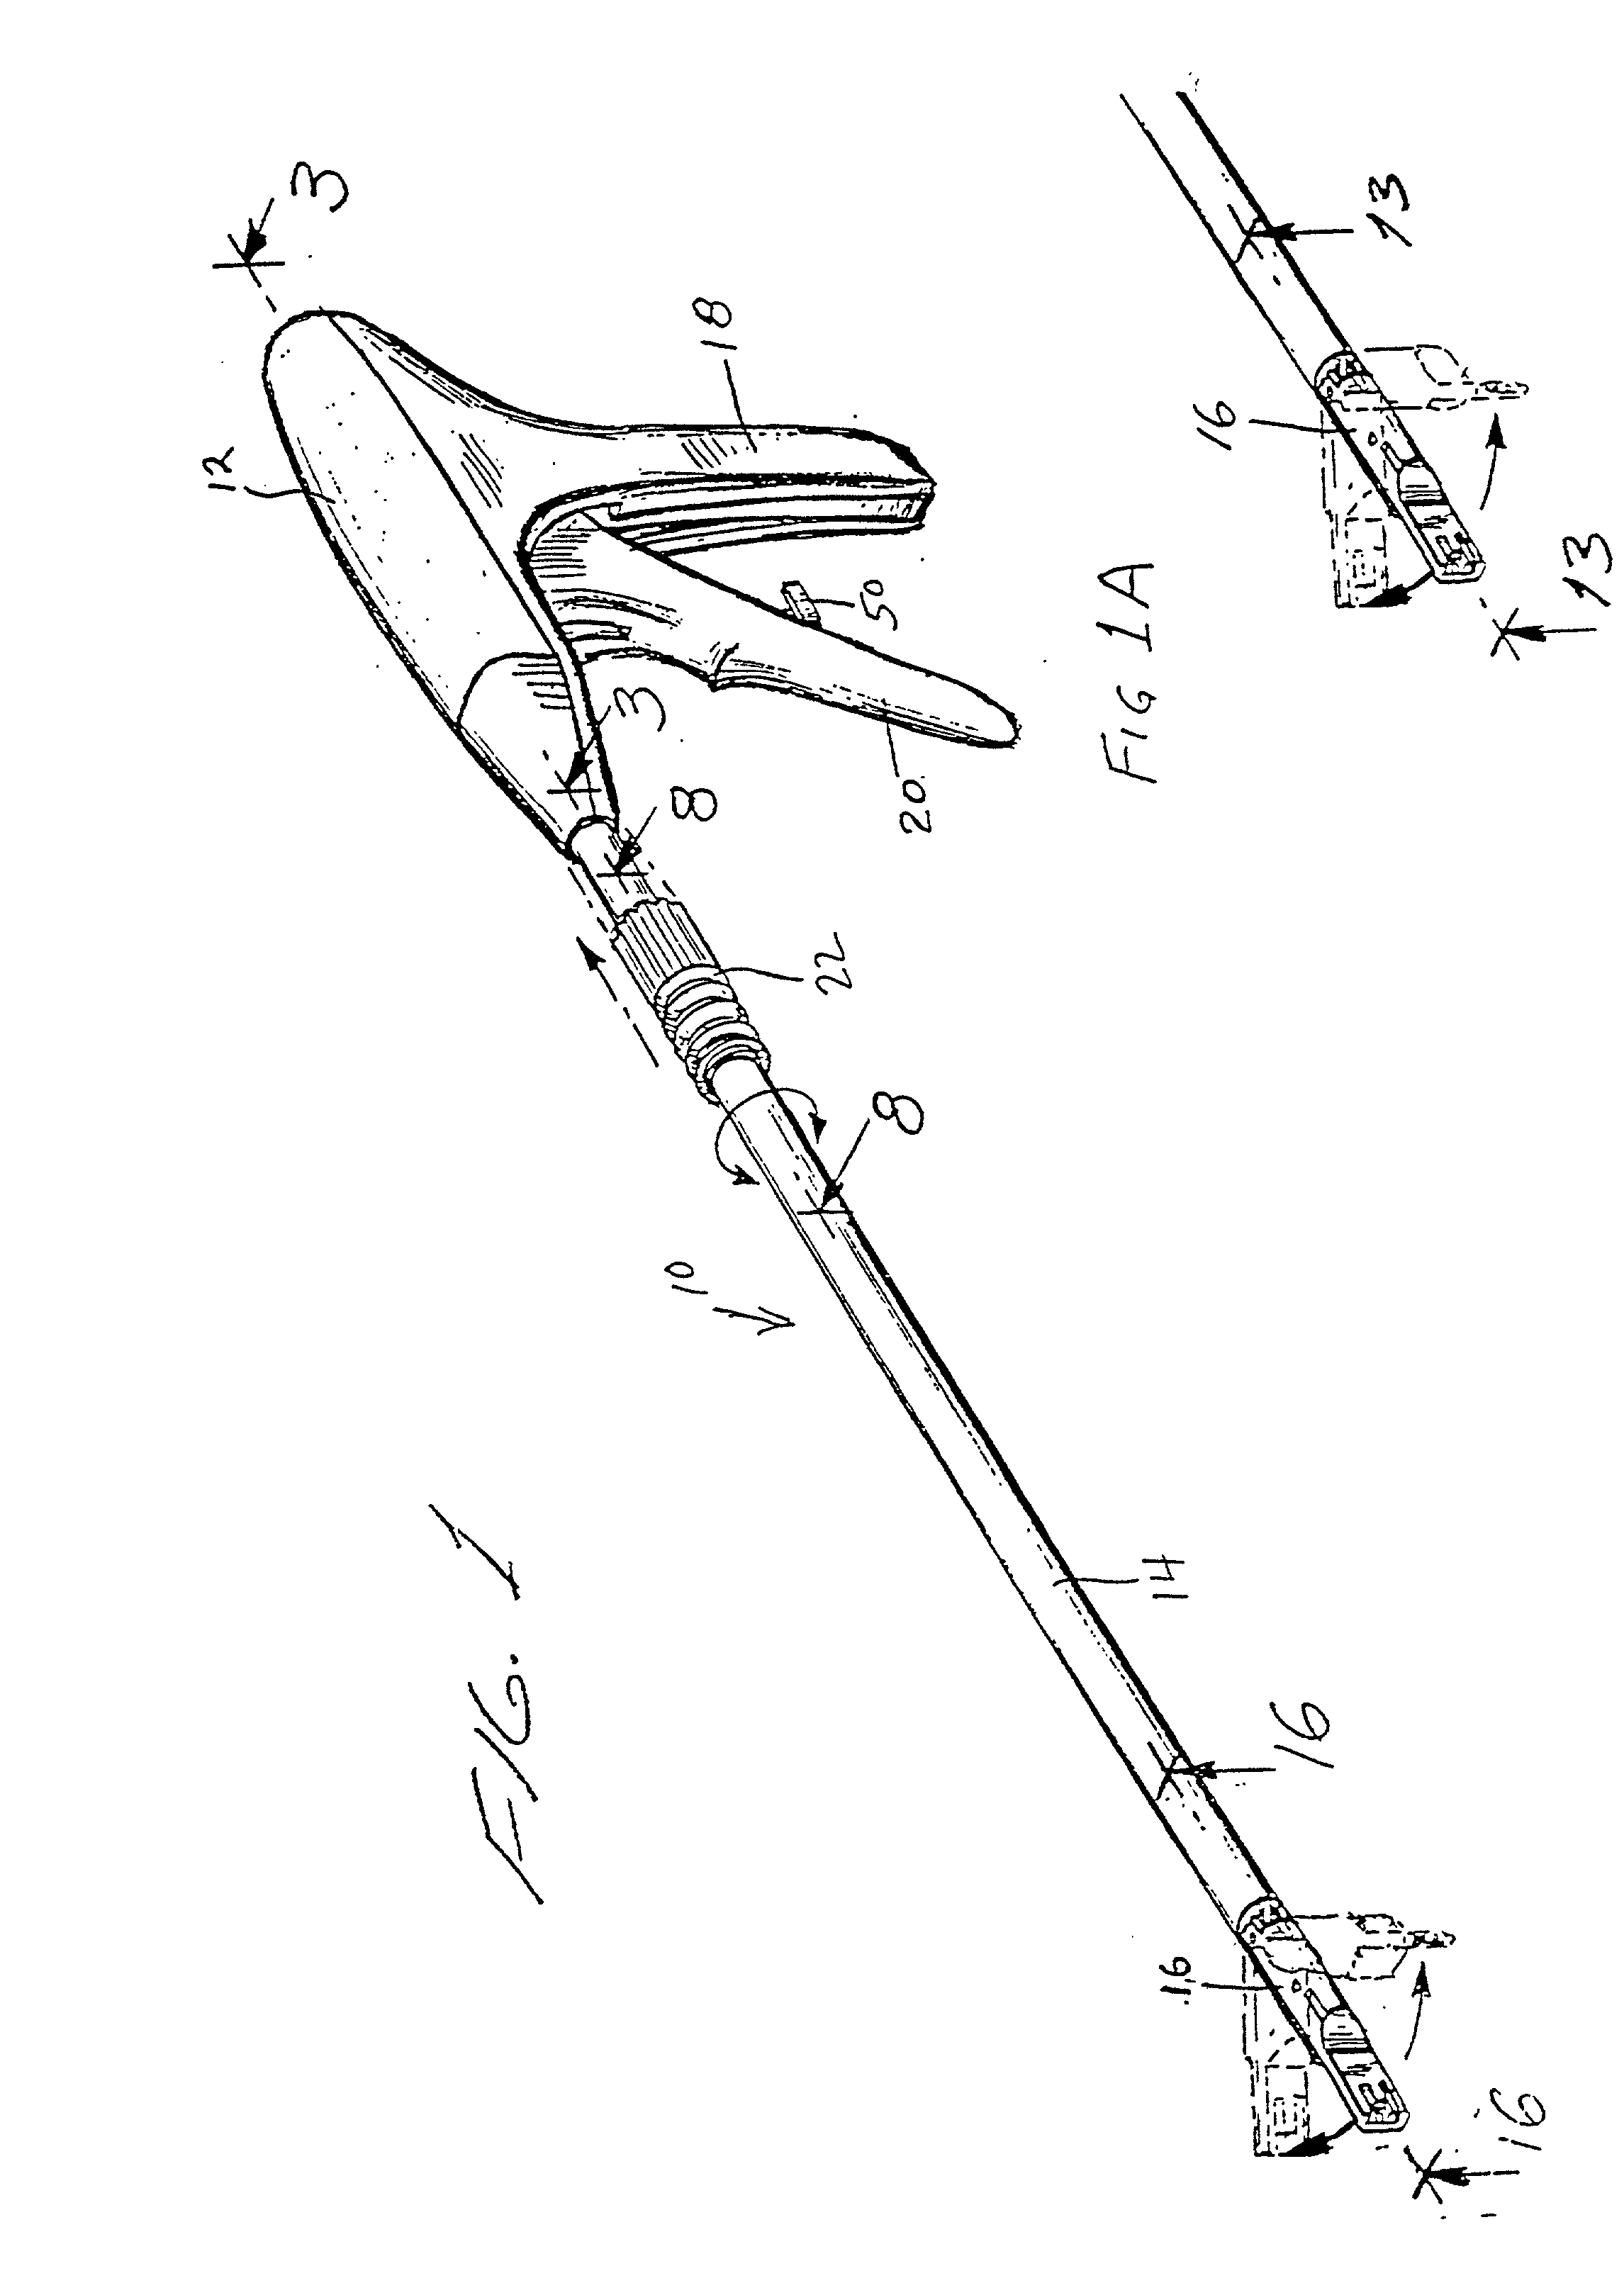 Apparatus and method for applying surgical staples to attach an object to body tissue